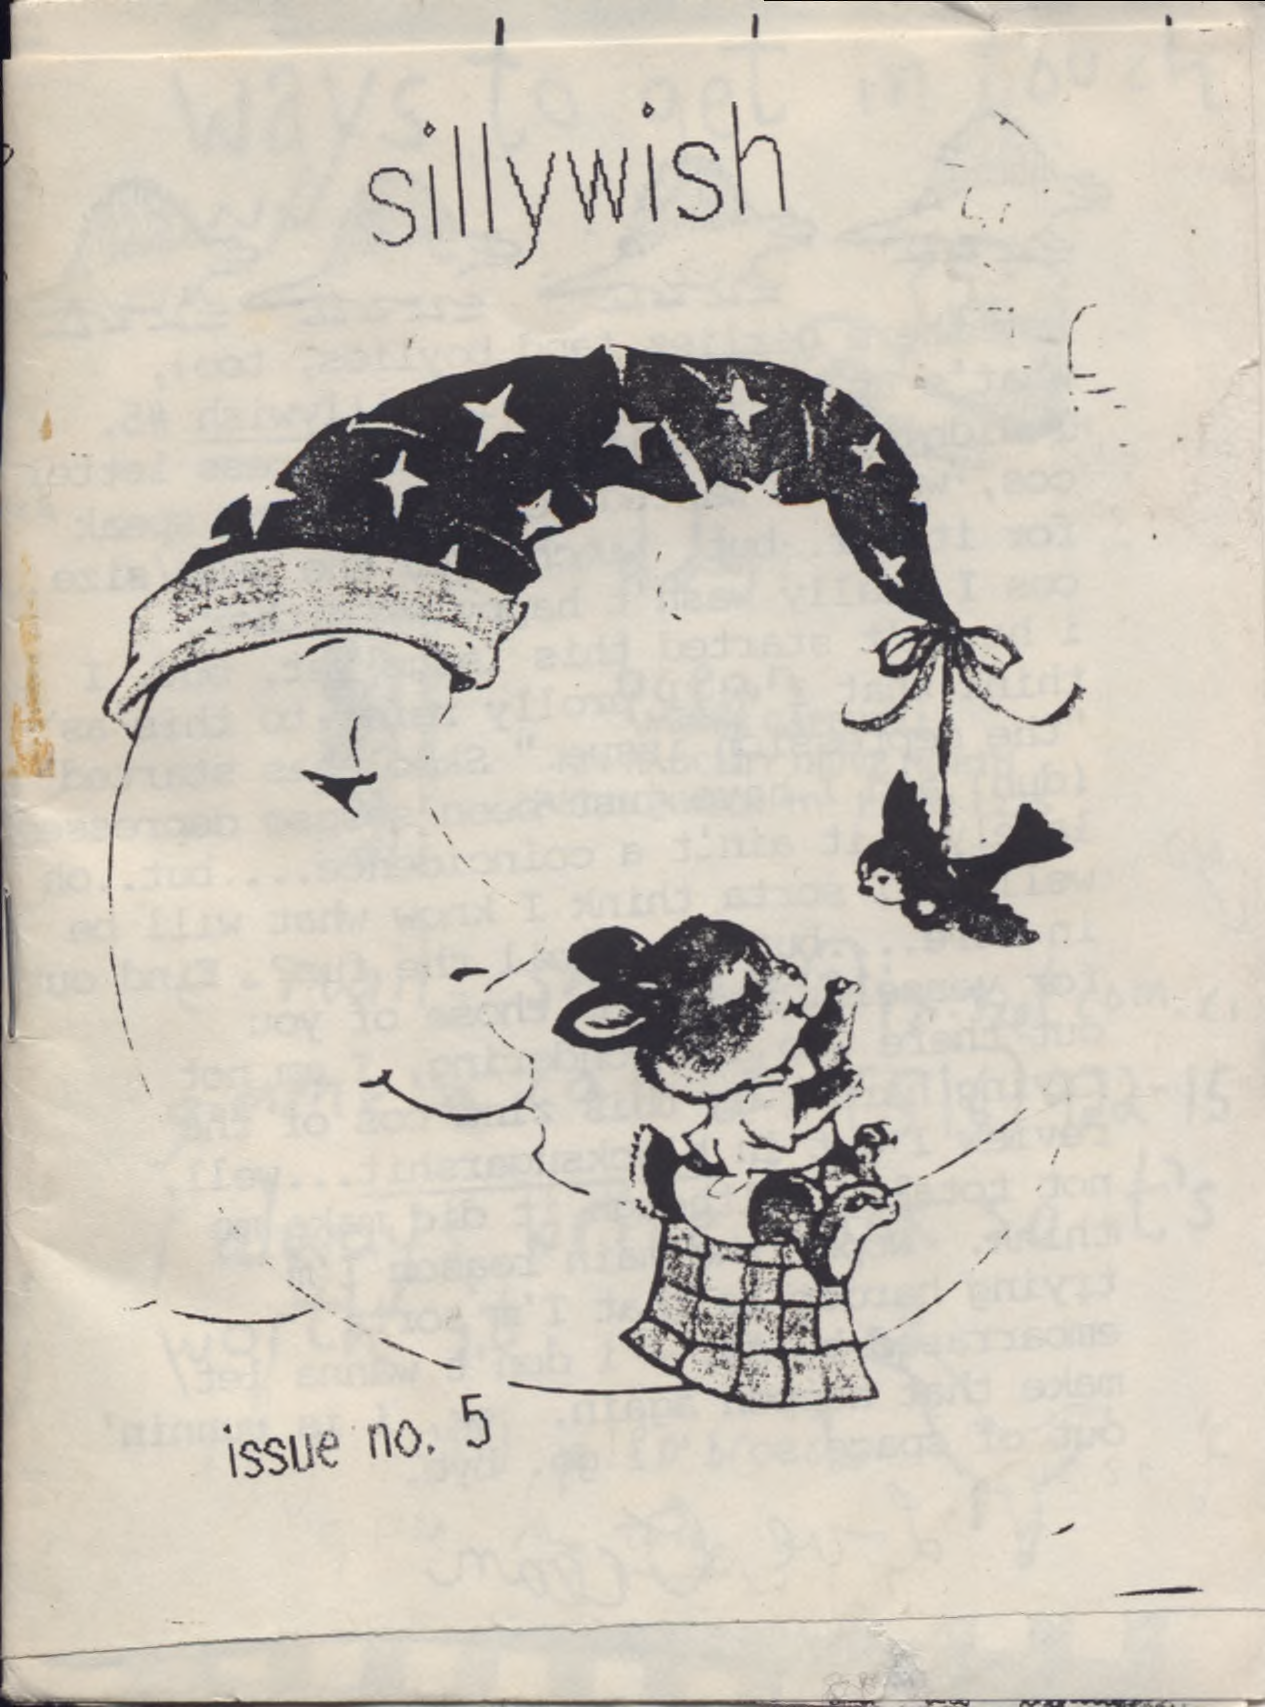 cover of sillywish zine